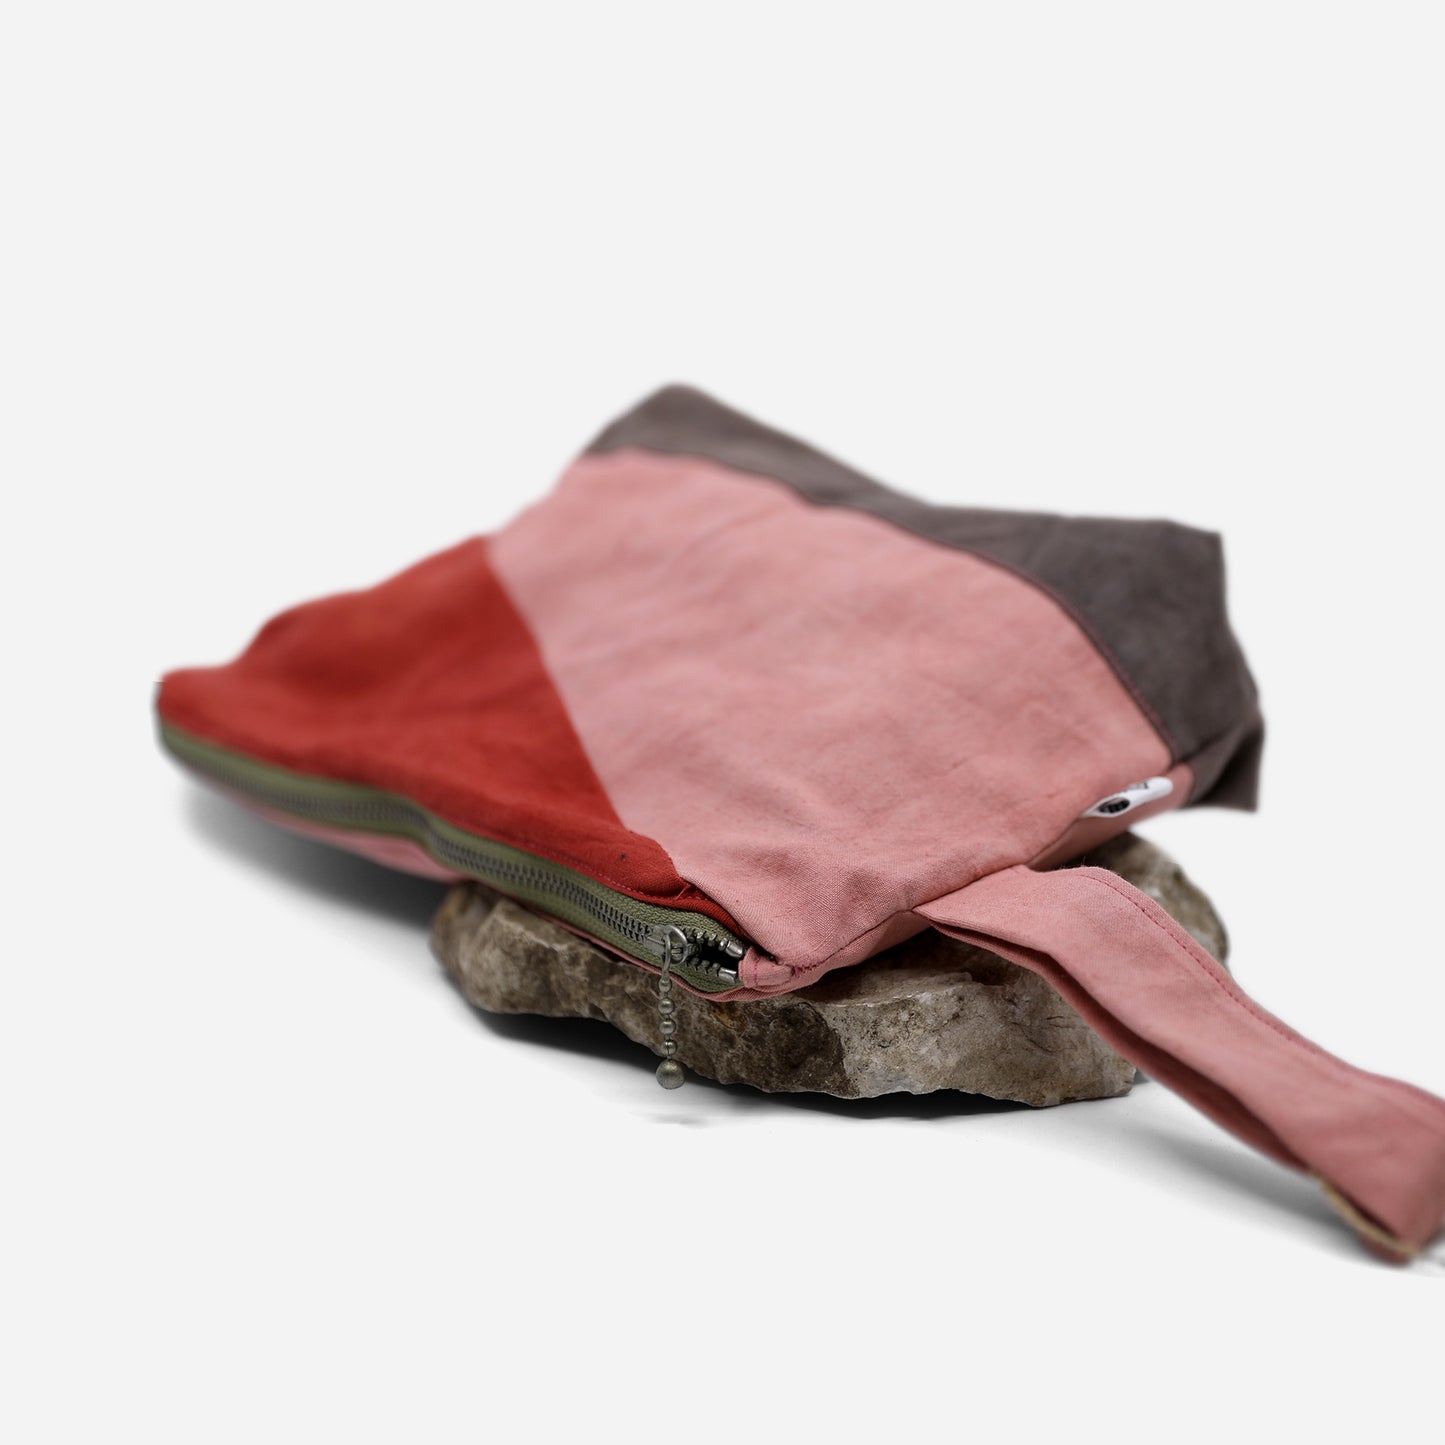 NATURALLY DYED POUCH